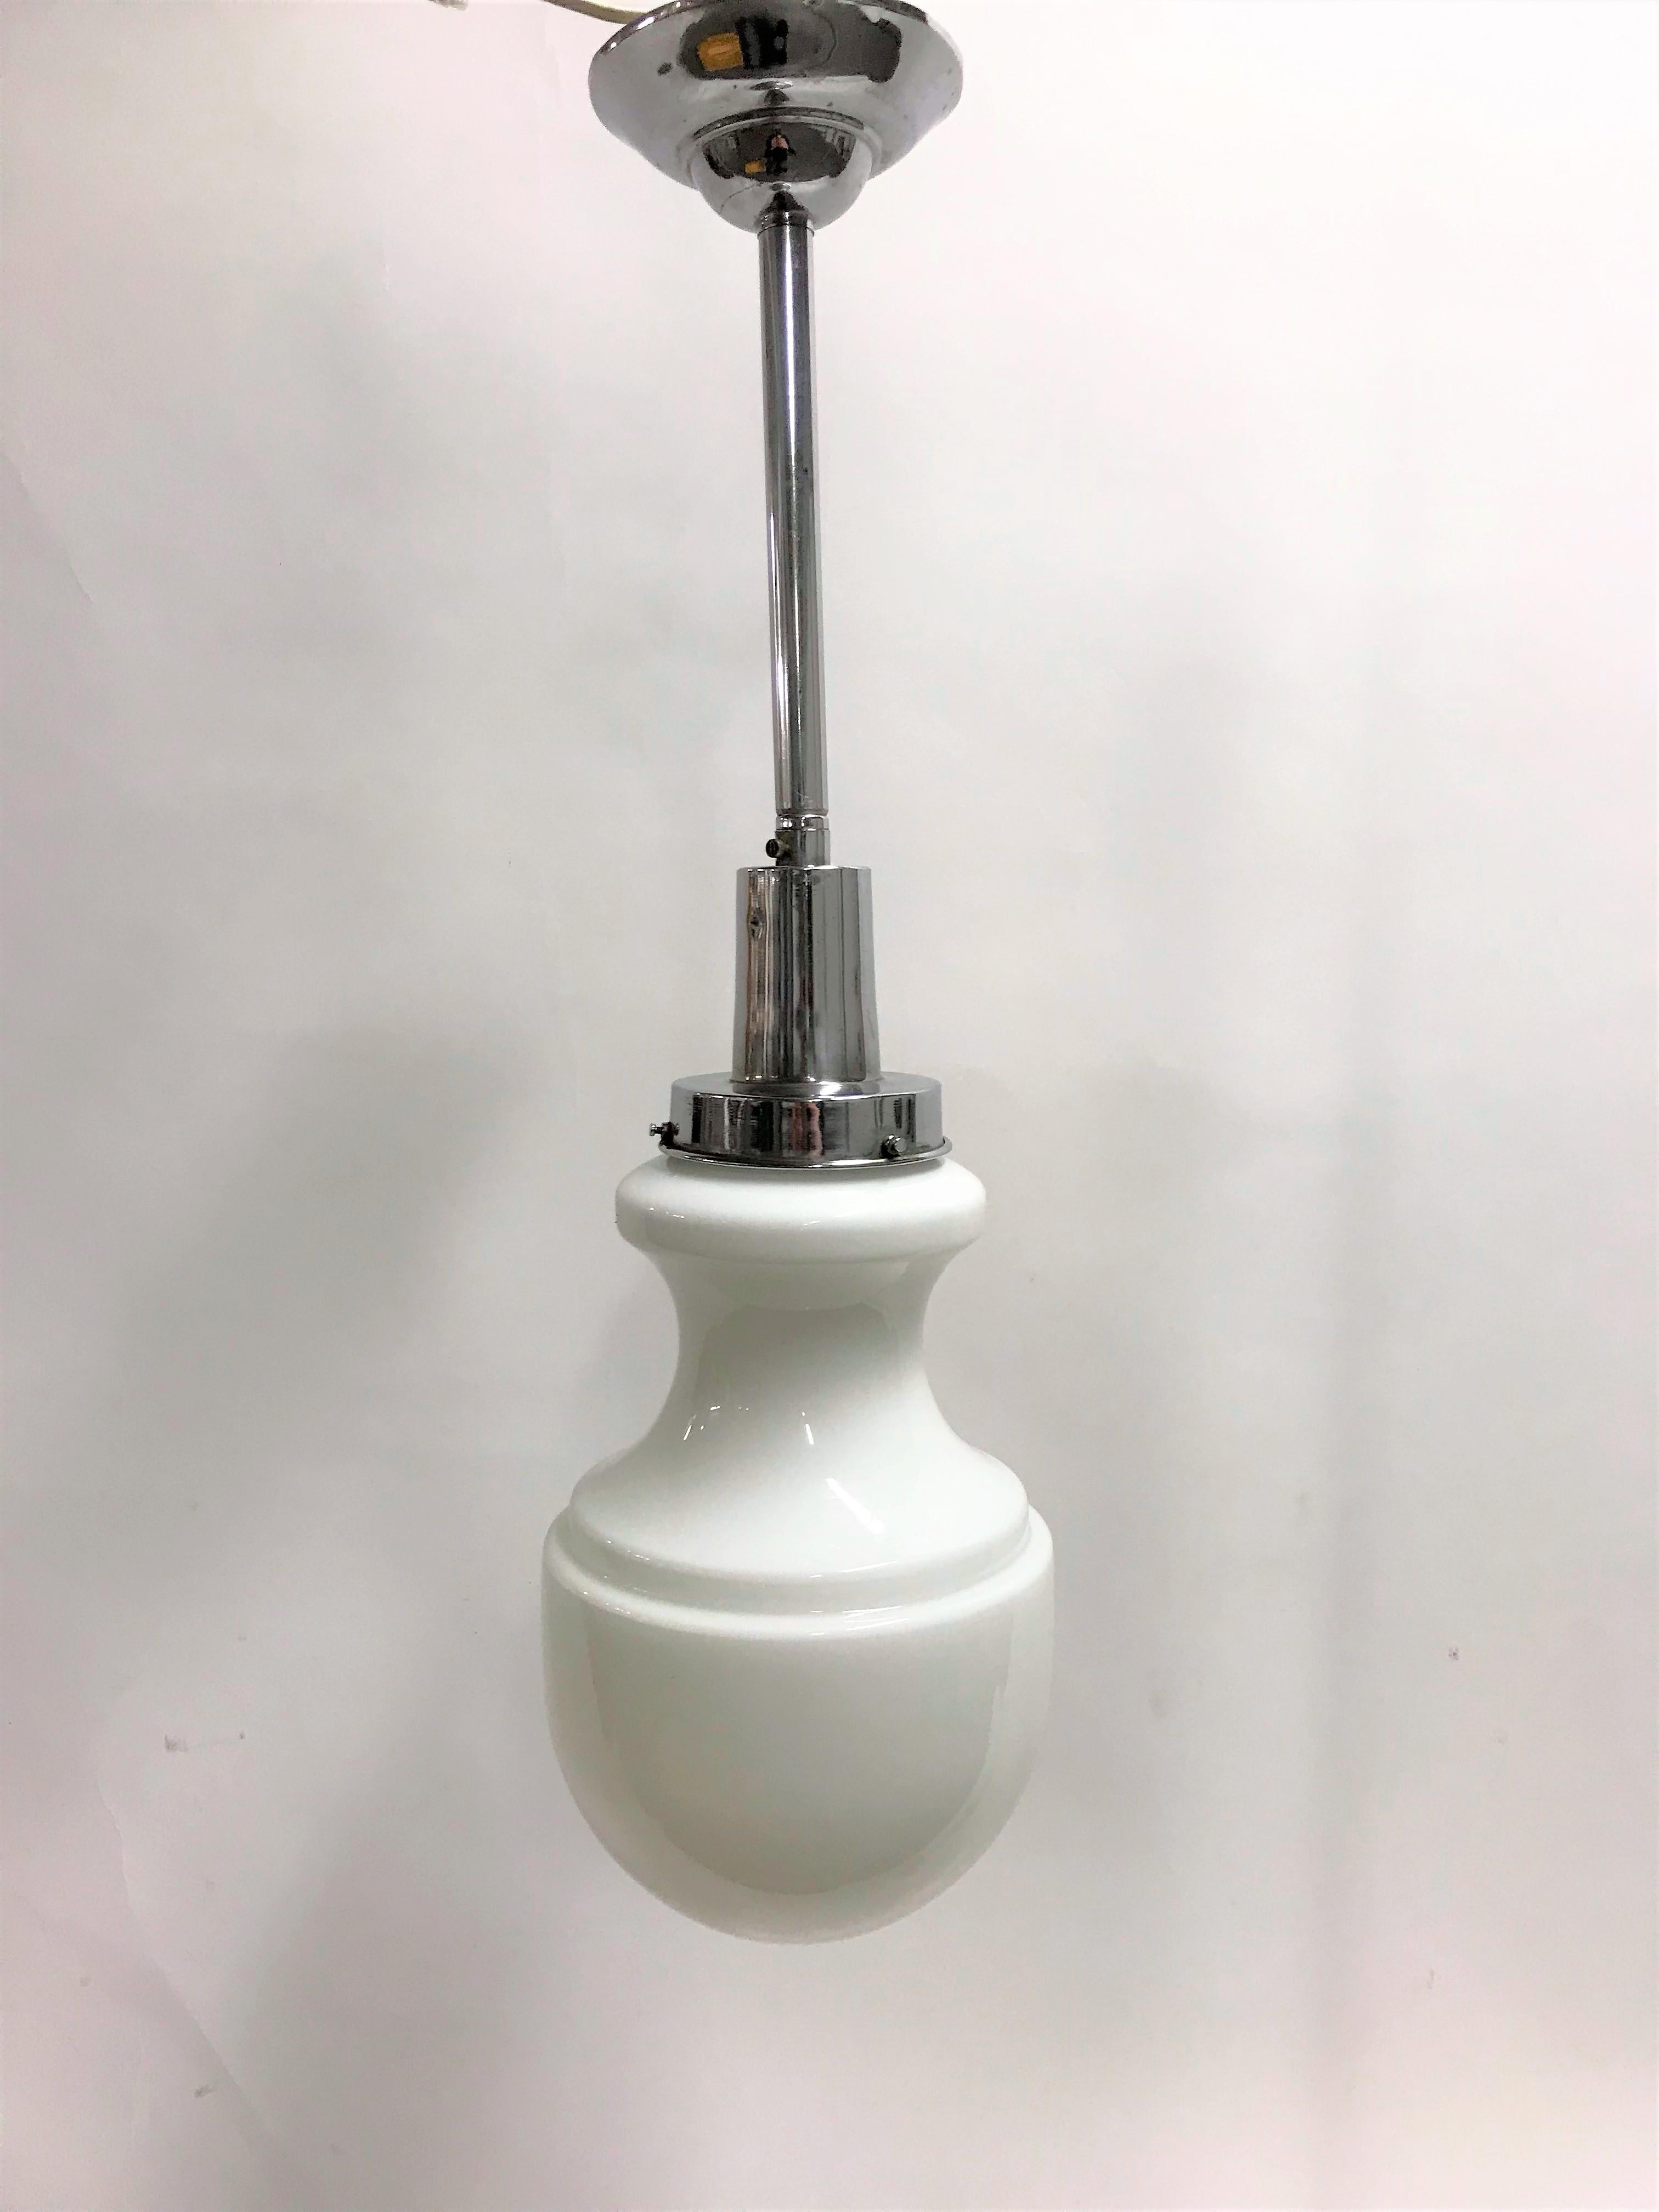 Unusual Art Deco pendant light made from opaline glass.

The light has a nickel plated shade holder.

It was used in larger homes with higher ceilings in the entrance halls or stairways. Sometimes these would be hung outside on the